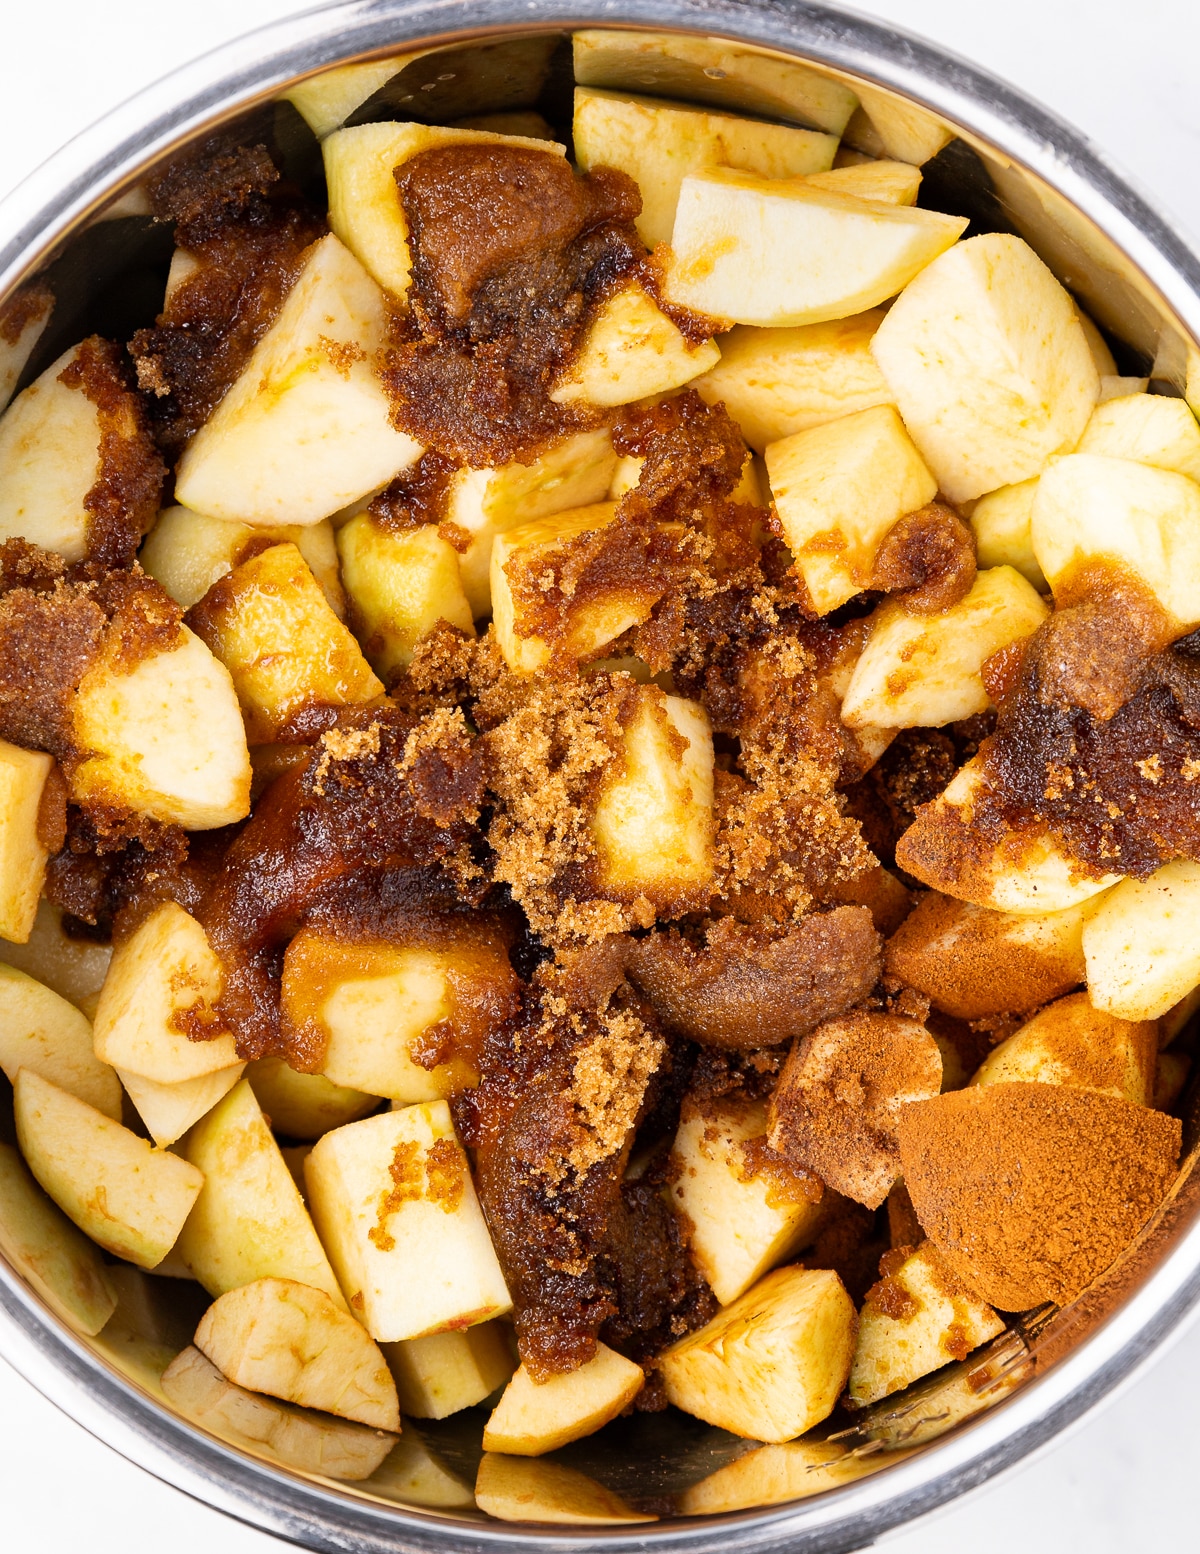 a pan full of raw apples, sugar, and spices